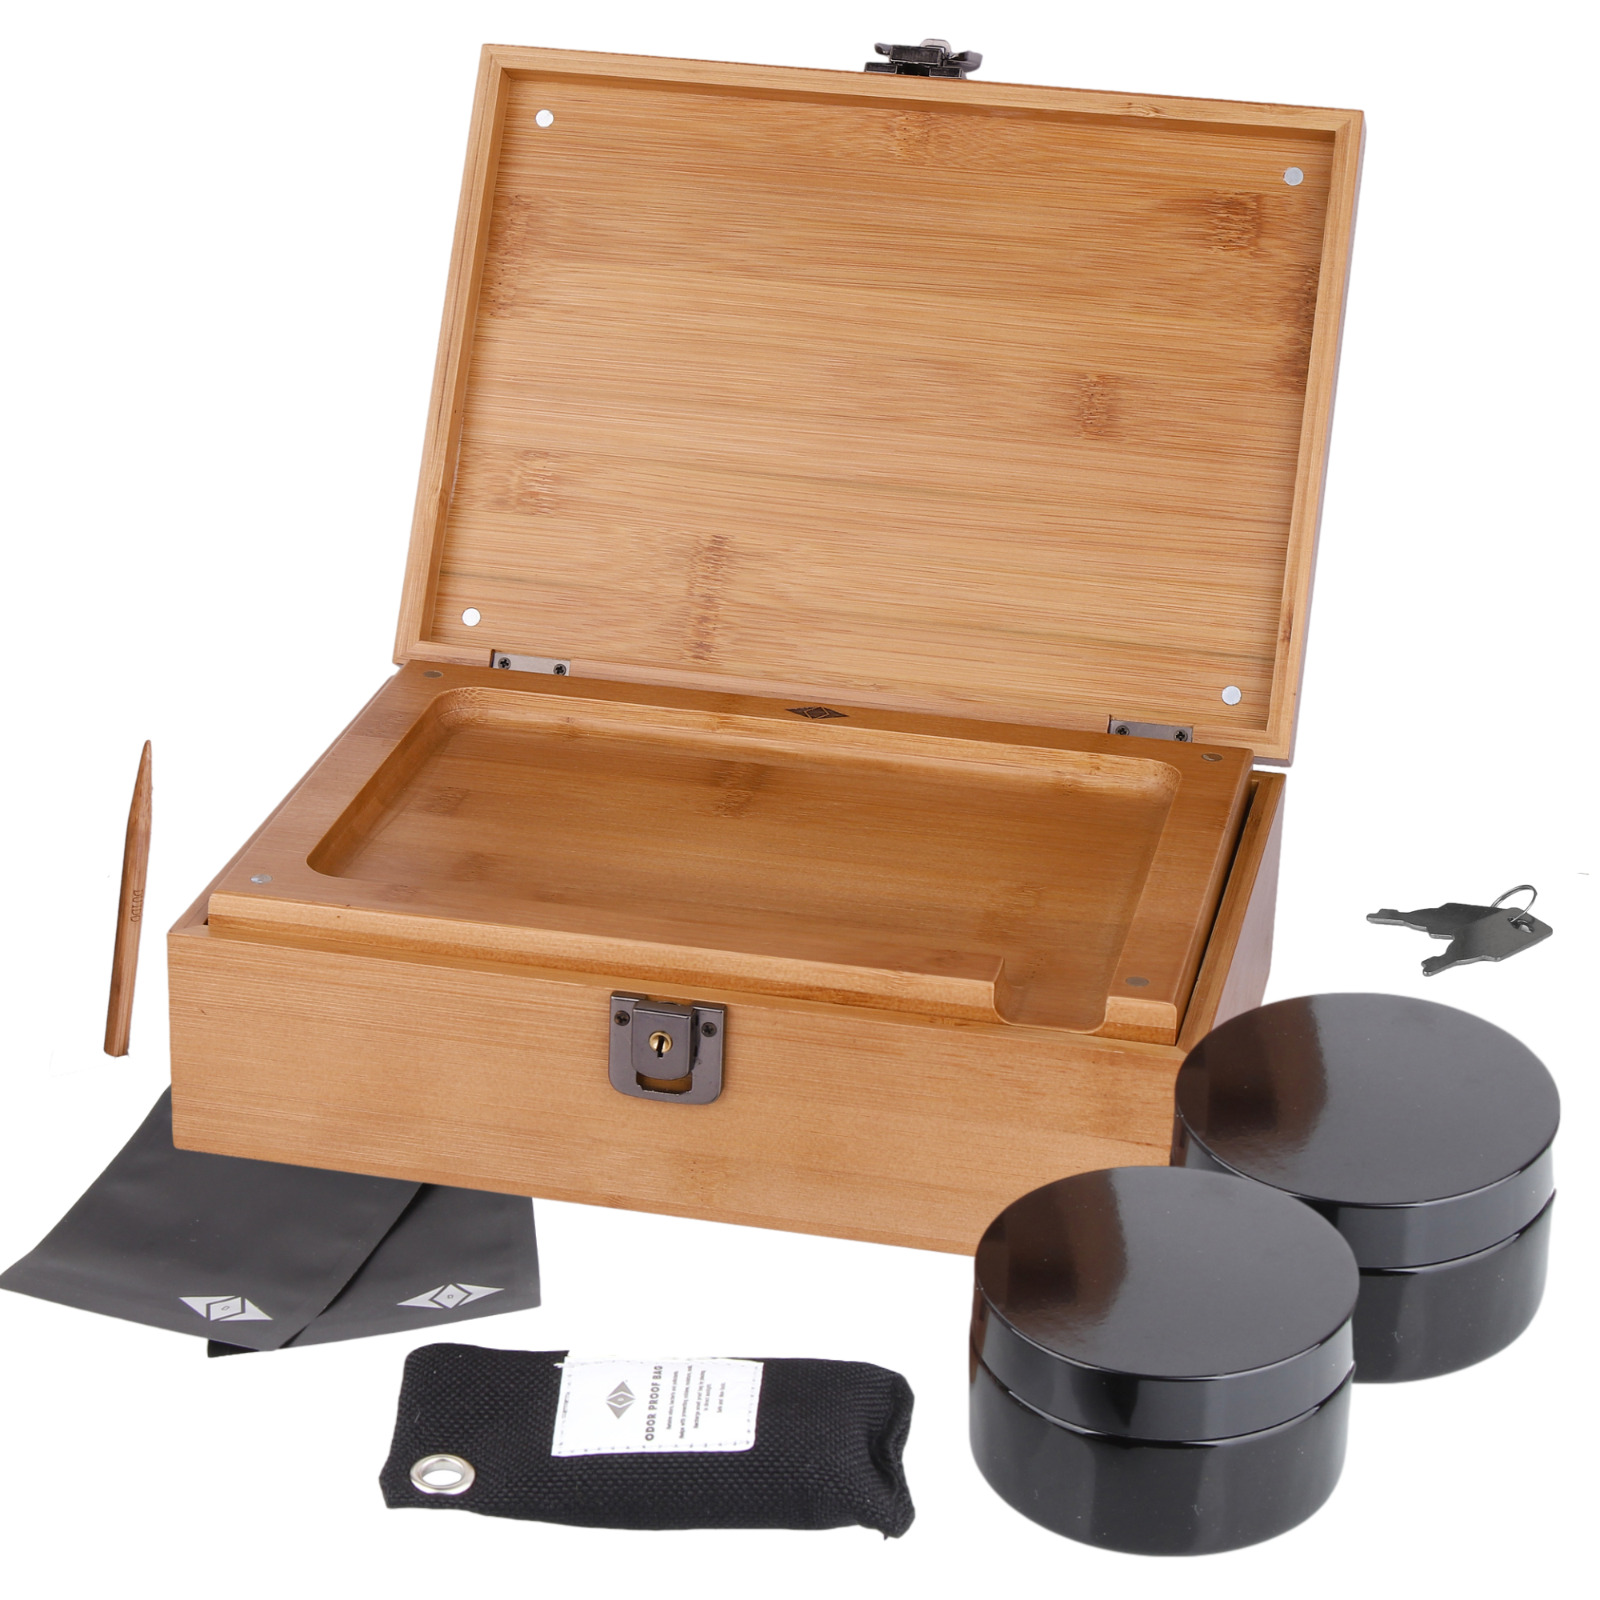 Premium Bamboo Large Stash Box Kit with Lock Wood Rolling Tray and Accessories